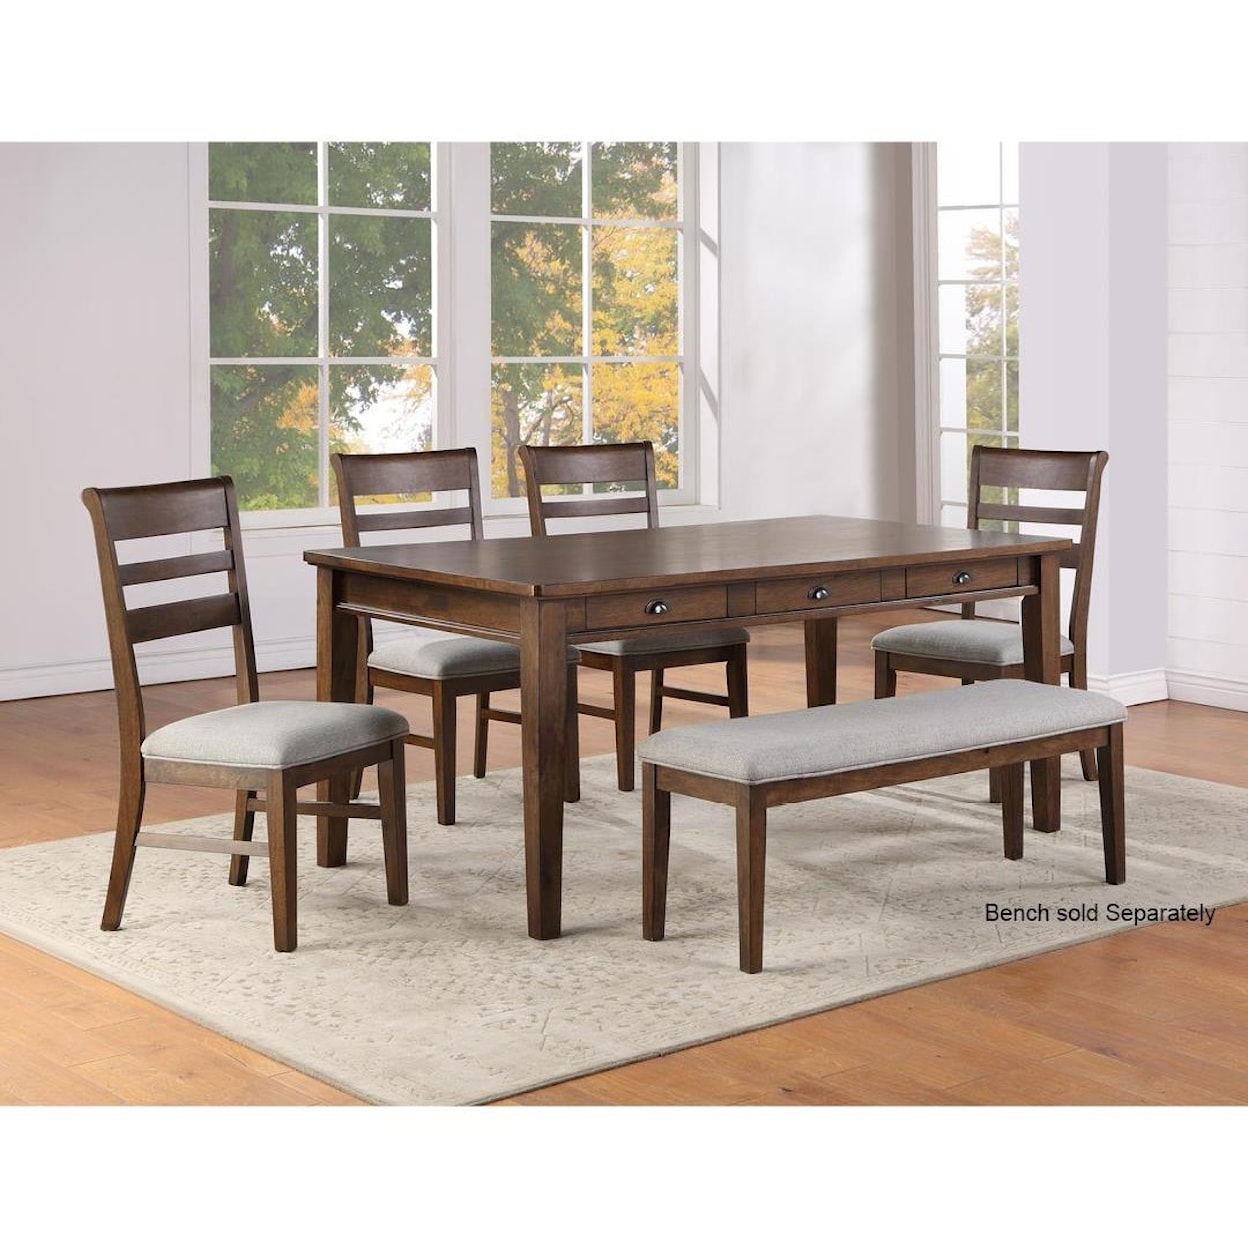 Steve Silver Ora 5-Piece Table and 4 Chairs